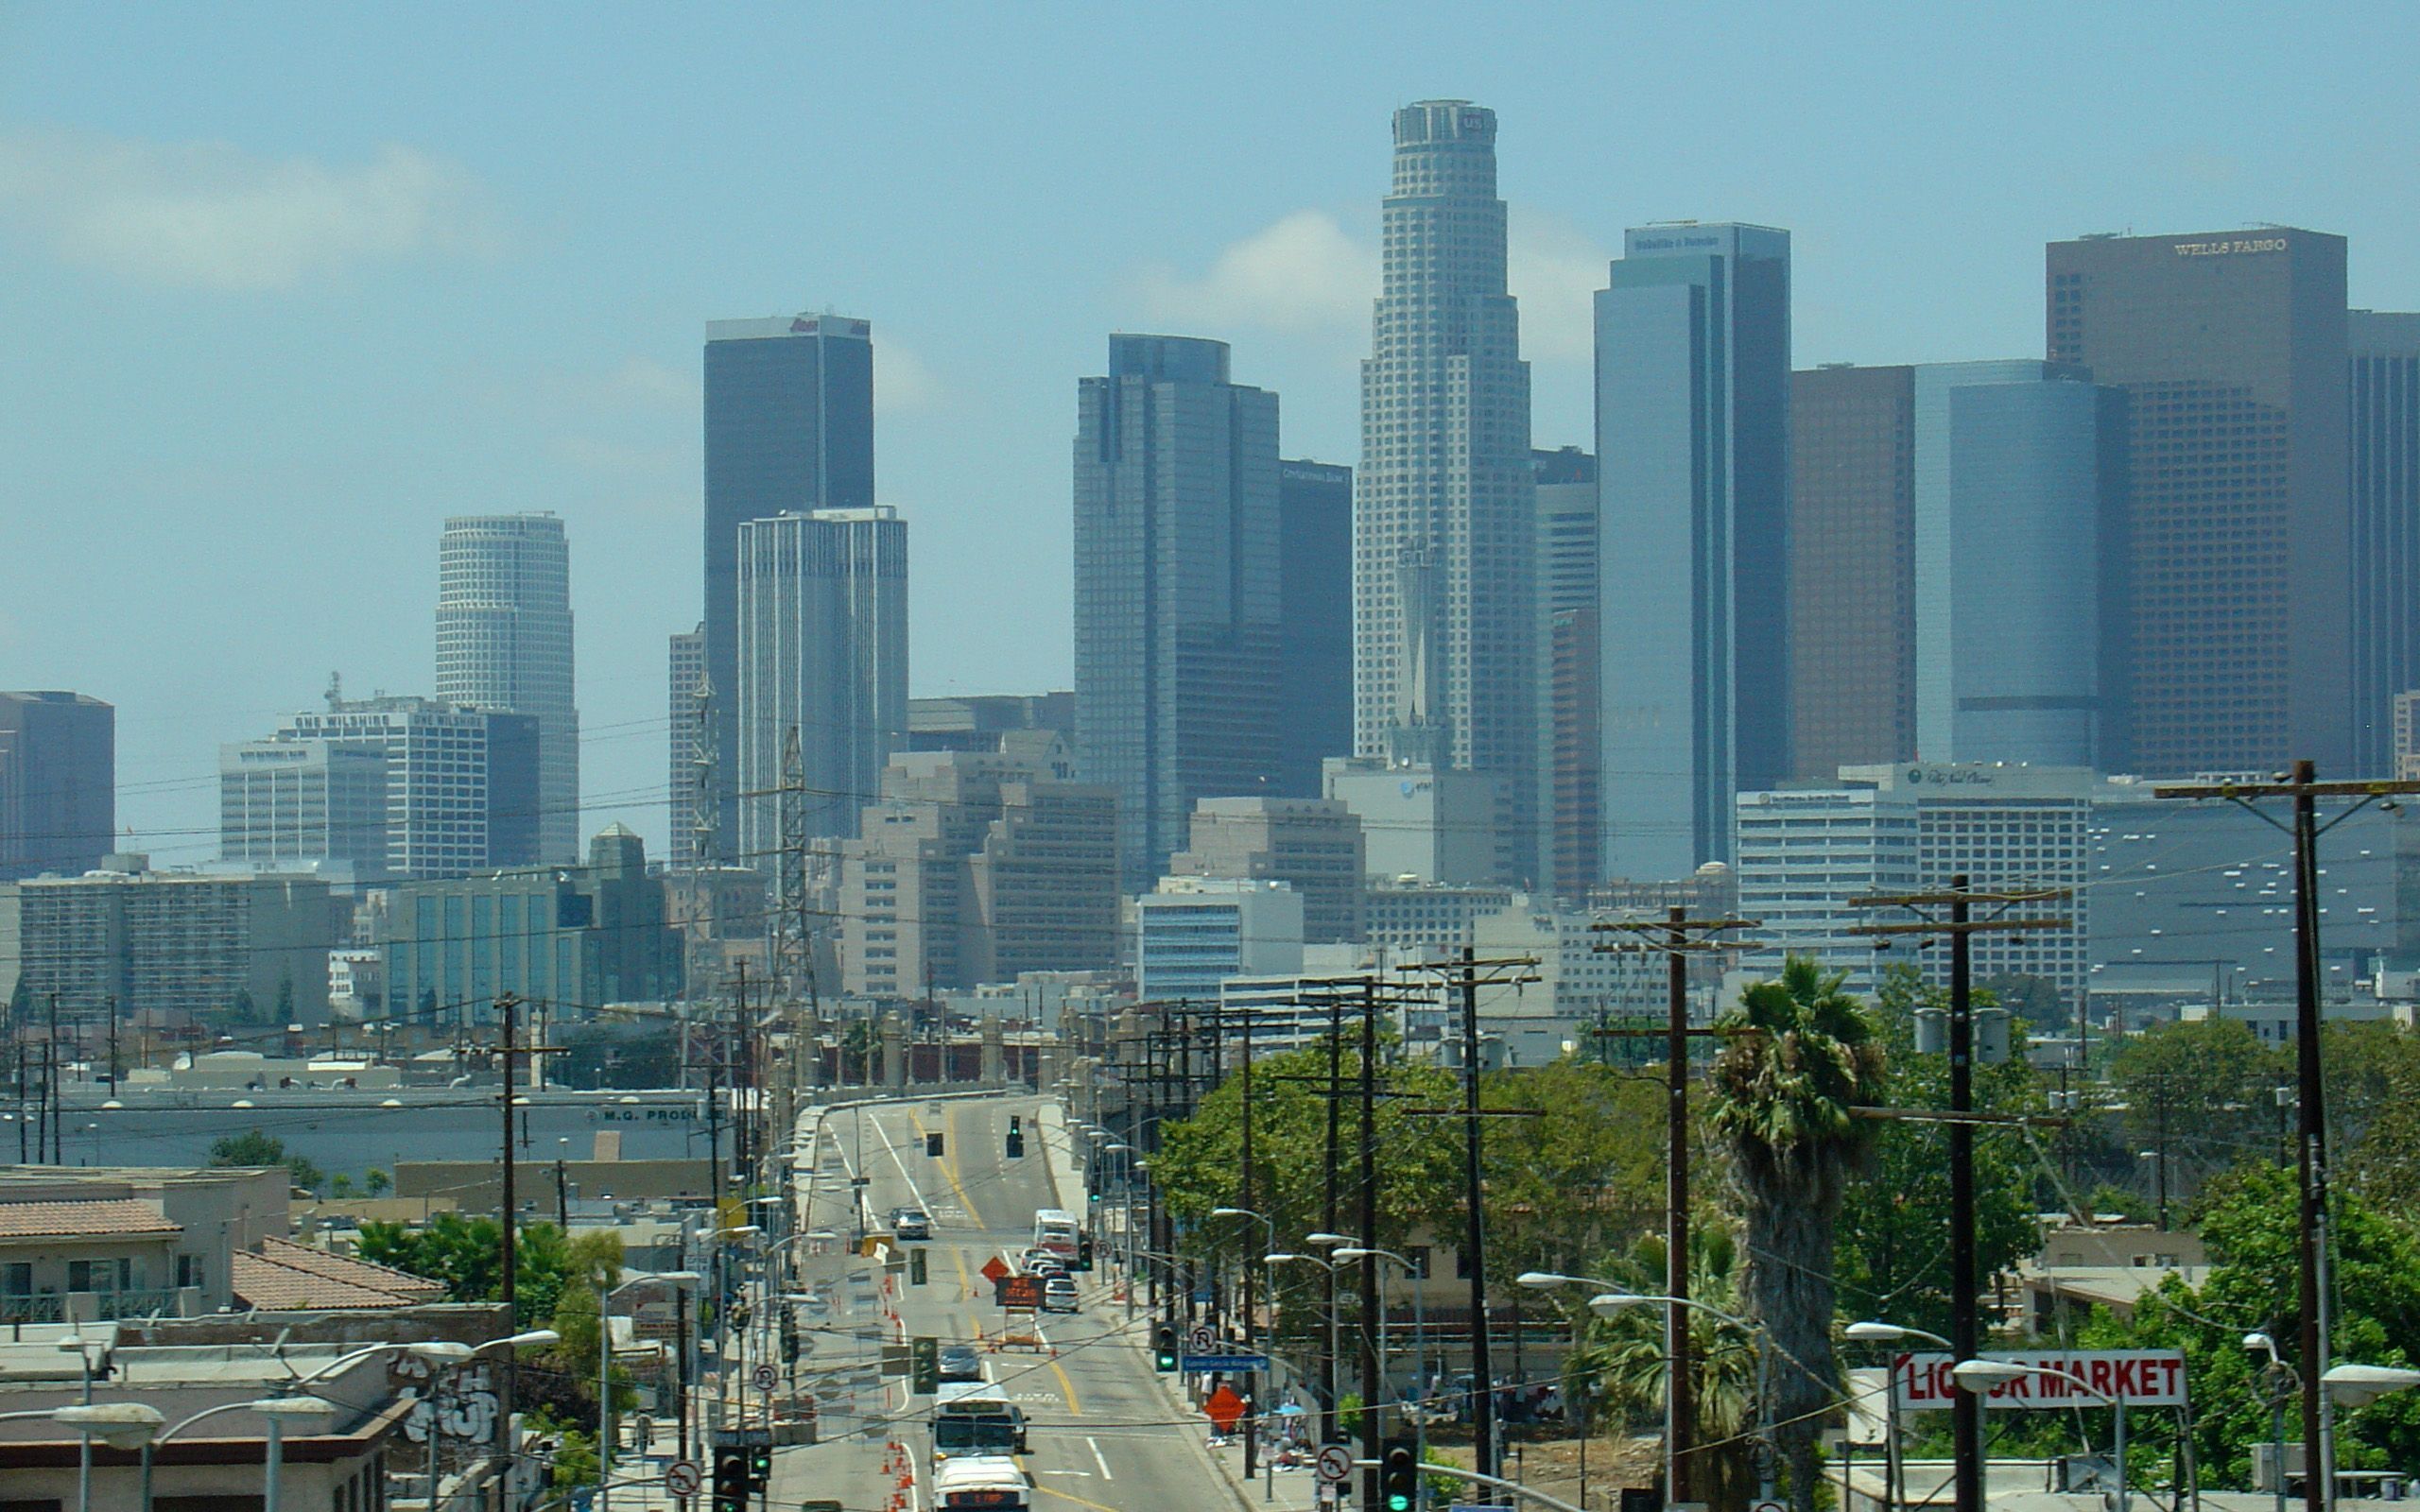 Los Angeles | Free Desktop Wallpapers for HD, Widescreen and Mobile